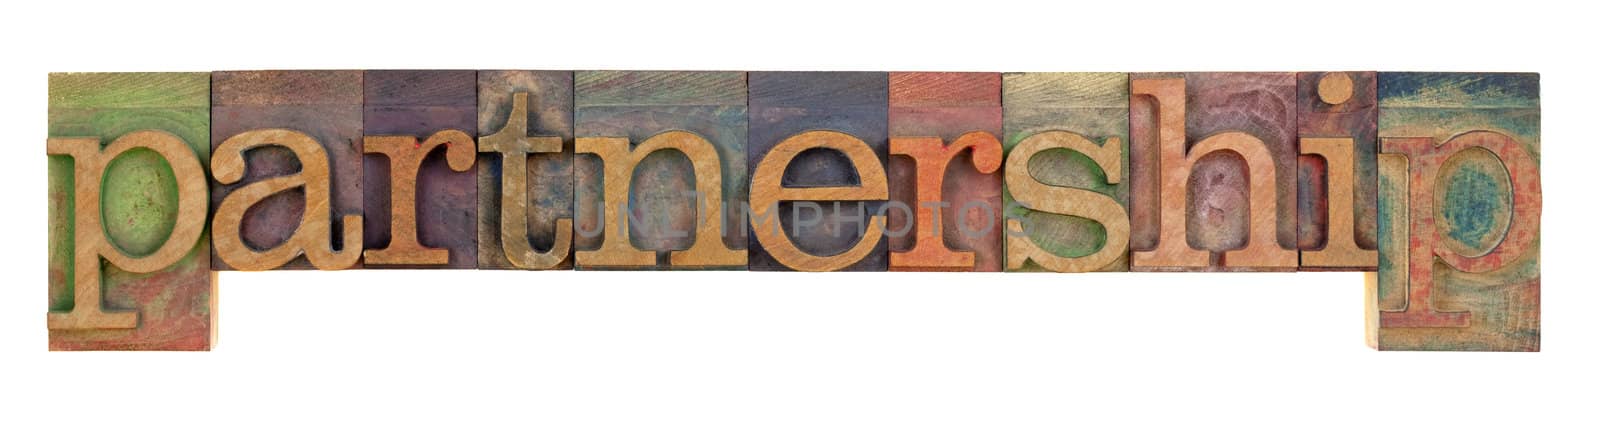 the word partnership in vintage letterpress type blocks, stained by color inks, isolated on white